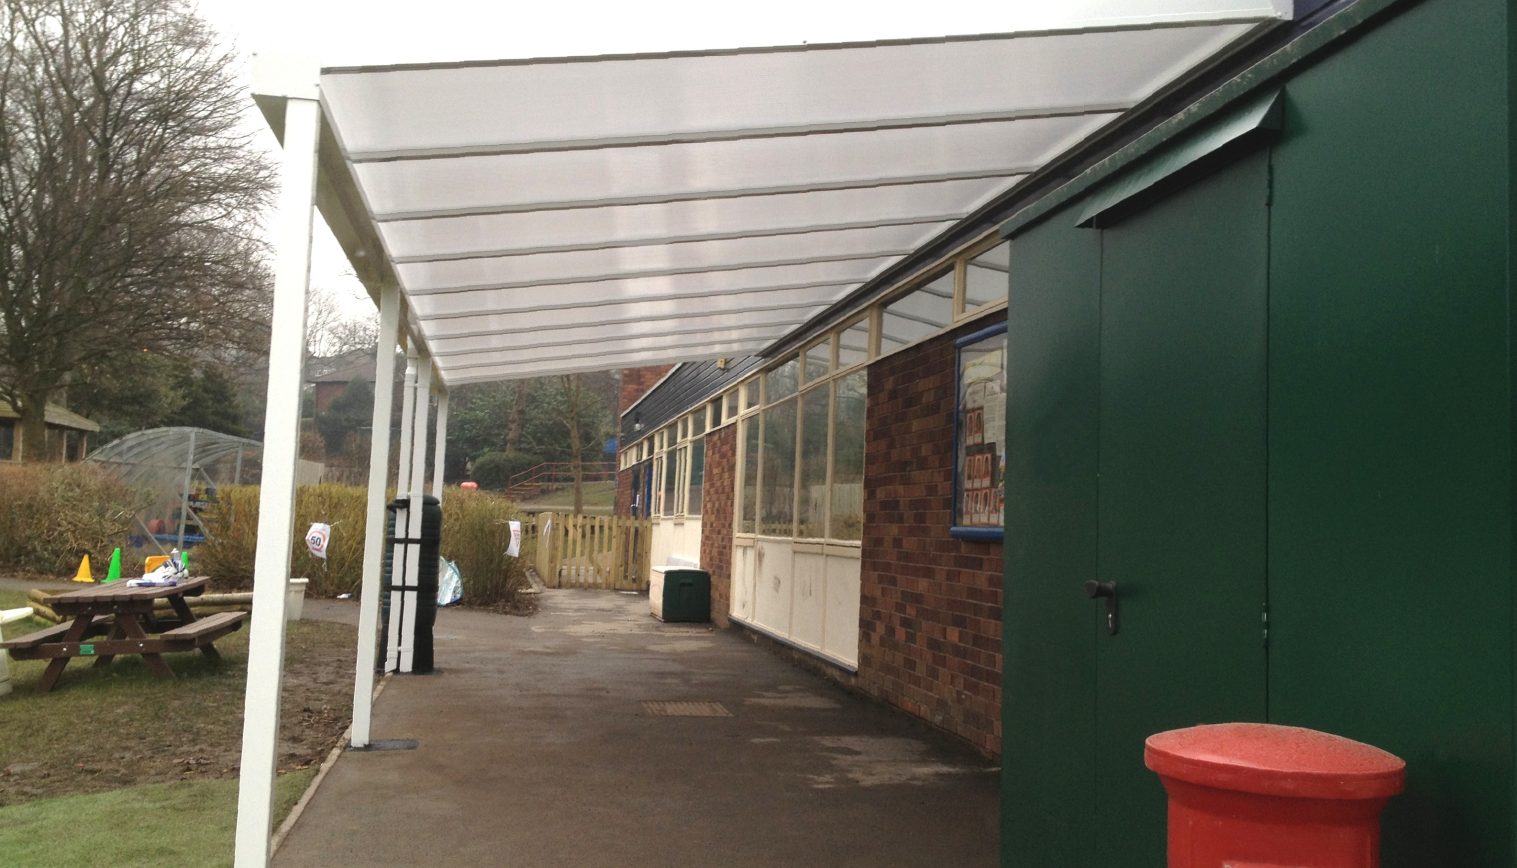 Woodley Primary School – 2nd Wall Mounted Canopy